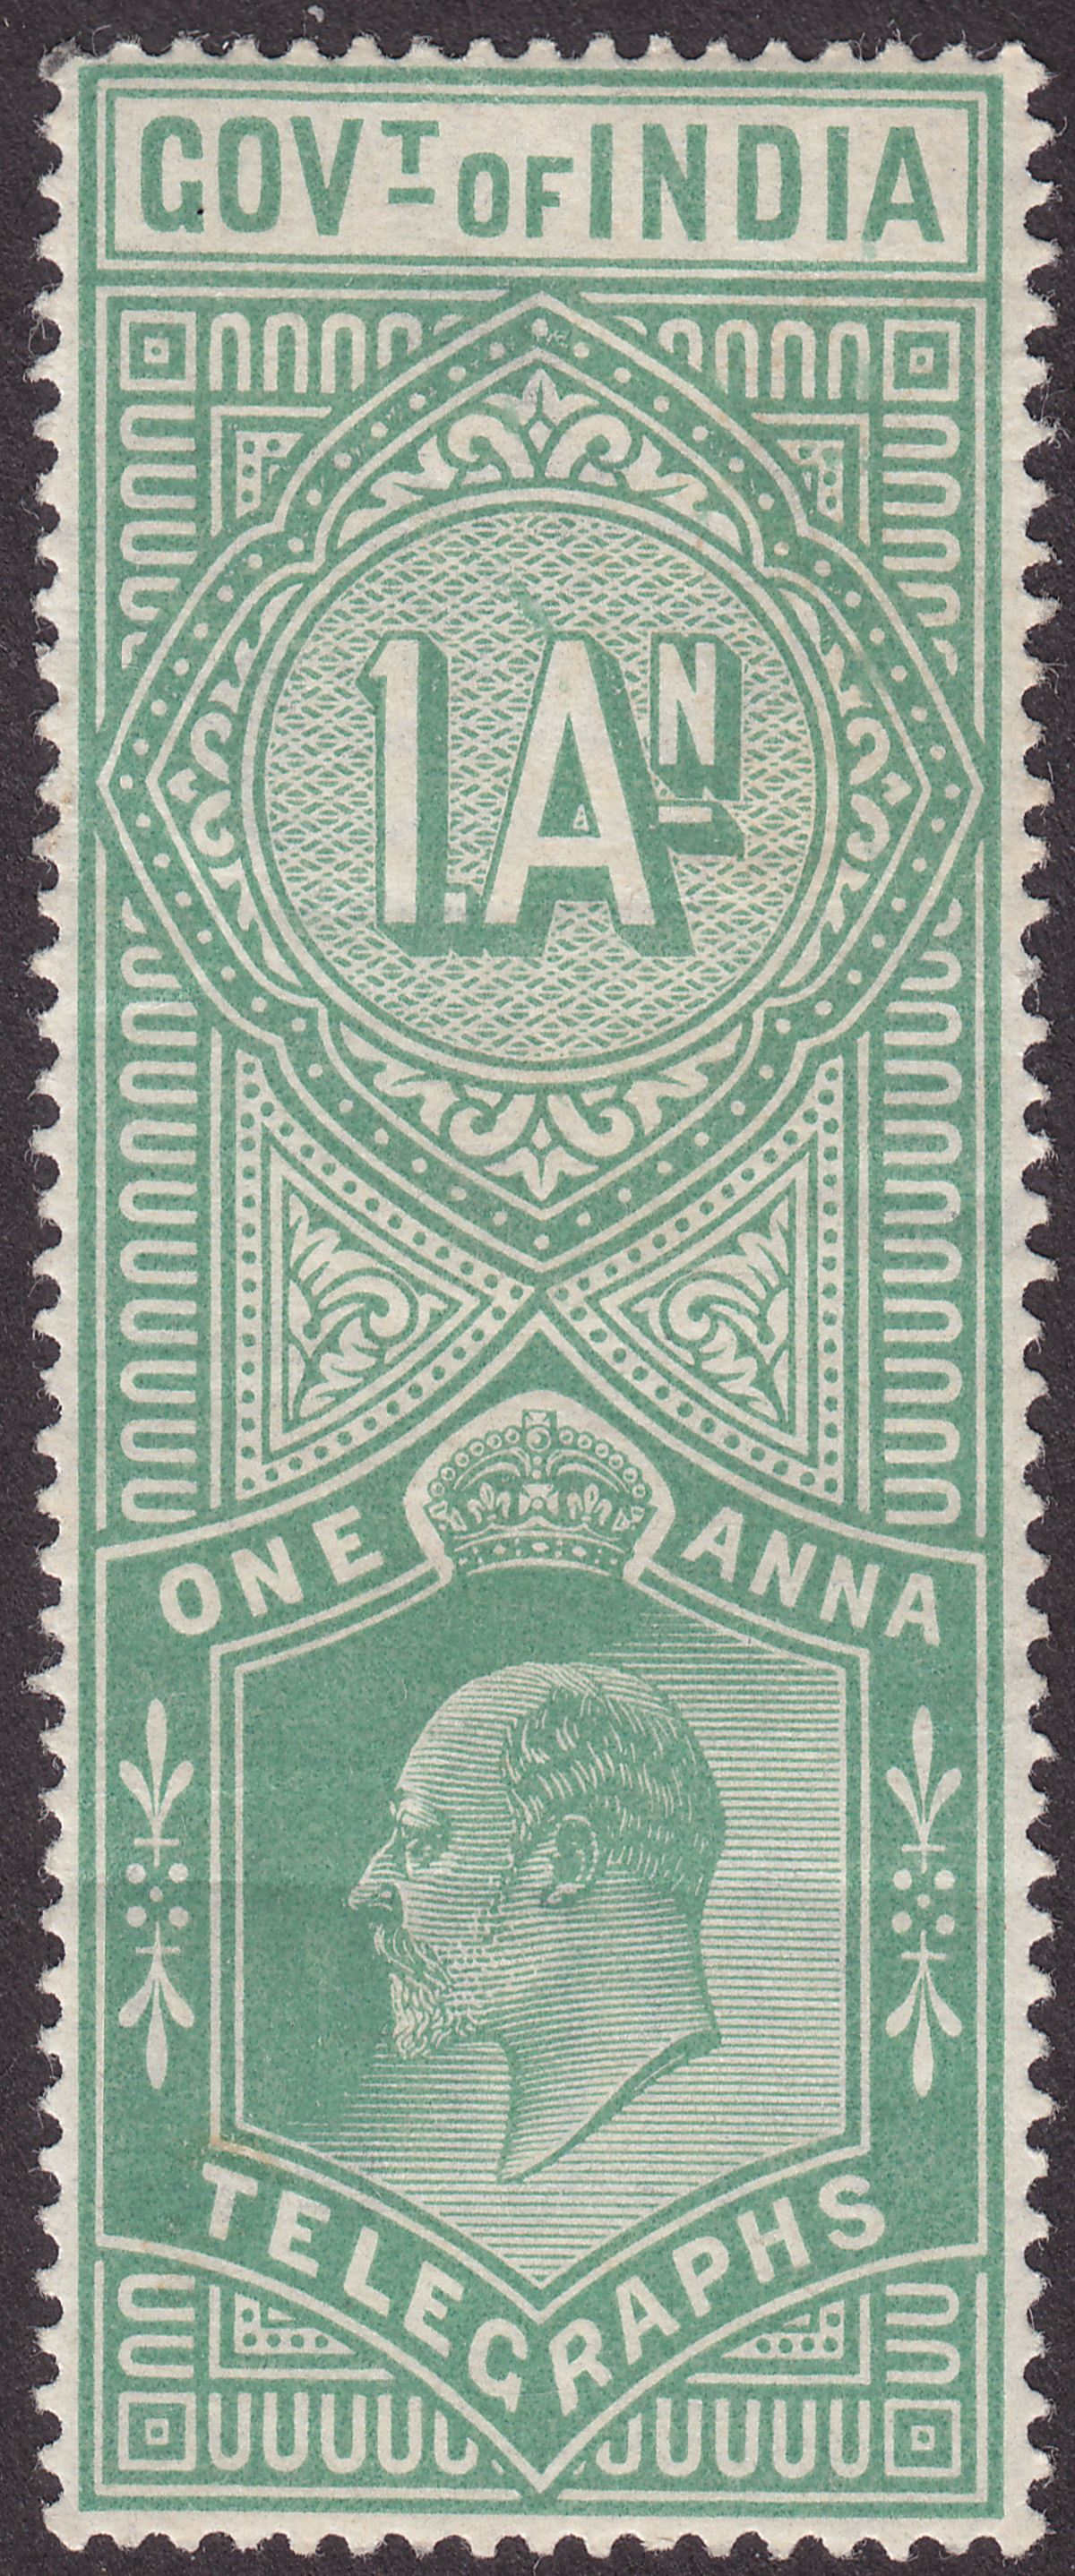 India 1904 KEVII Telegraph Stamp 1a Yellow-Green Mint SG T56 cat £24